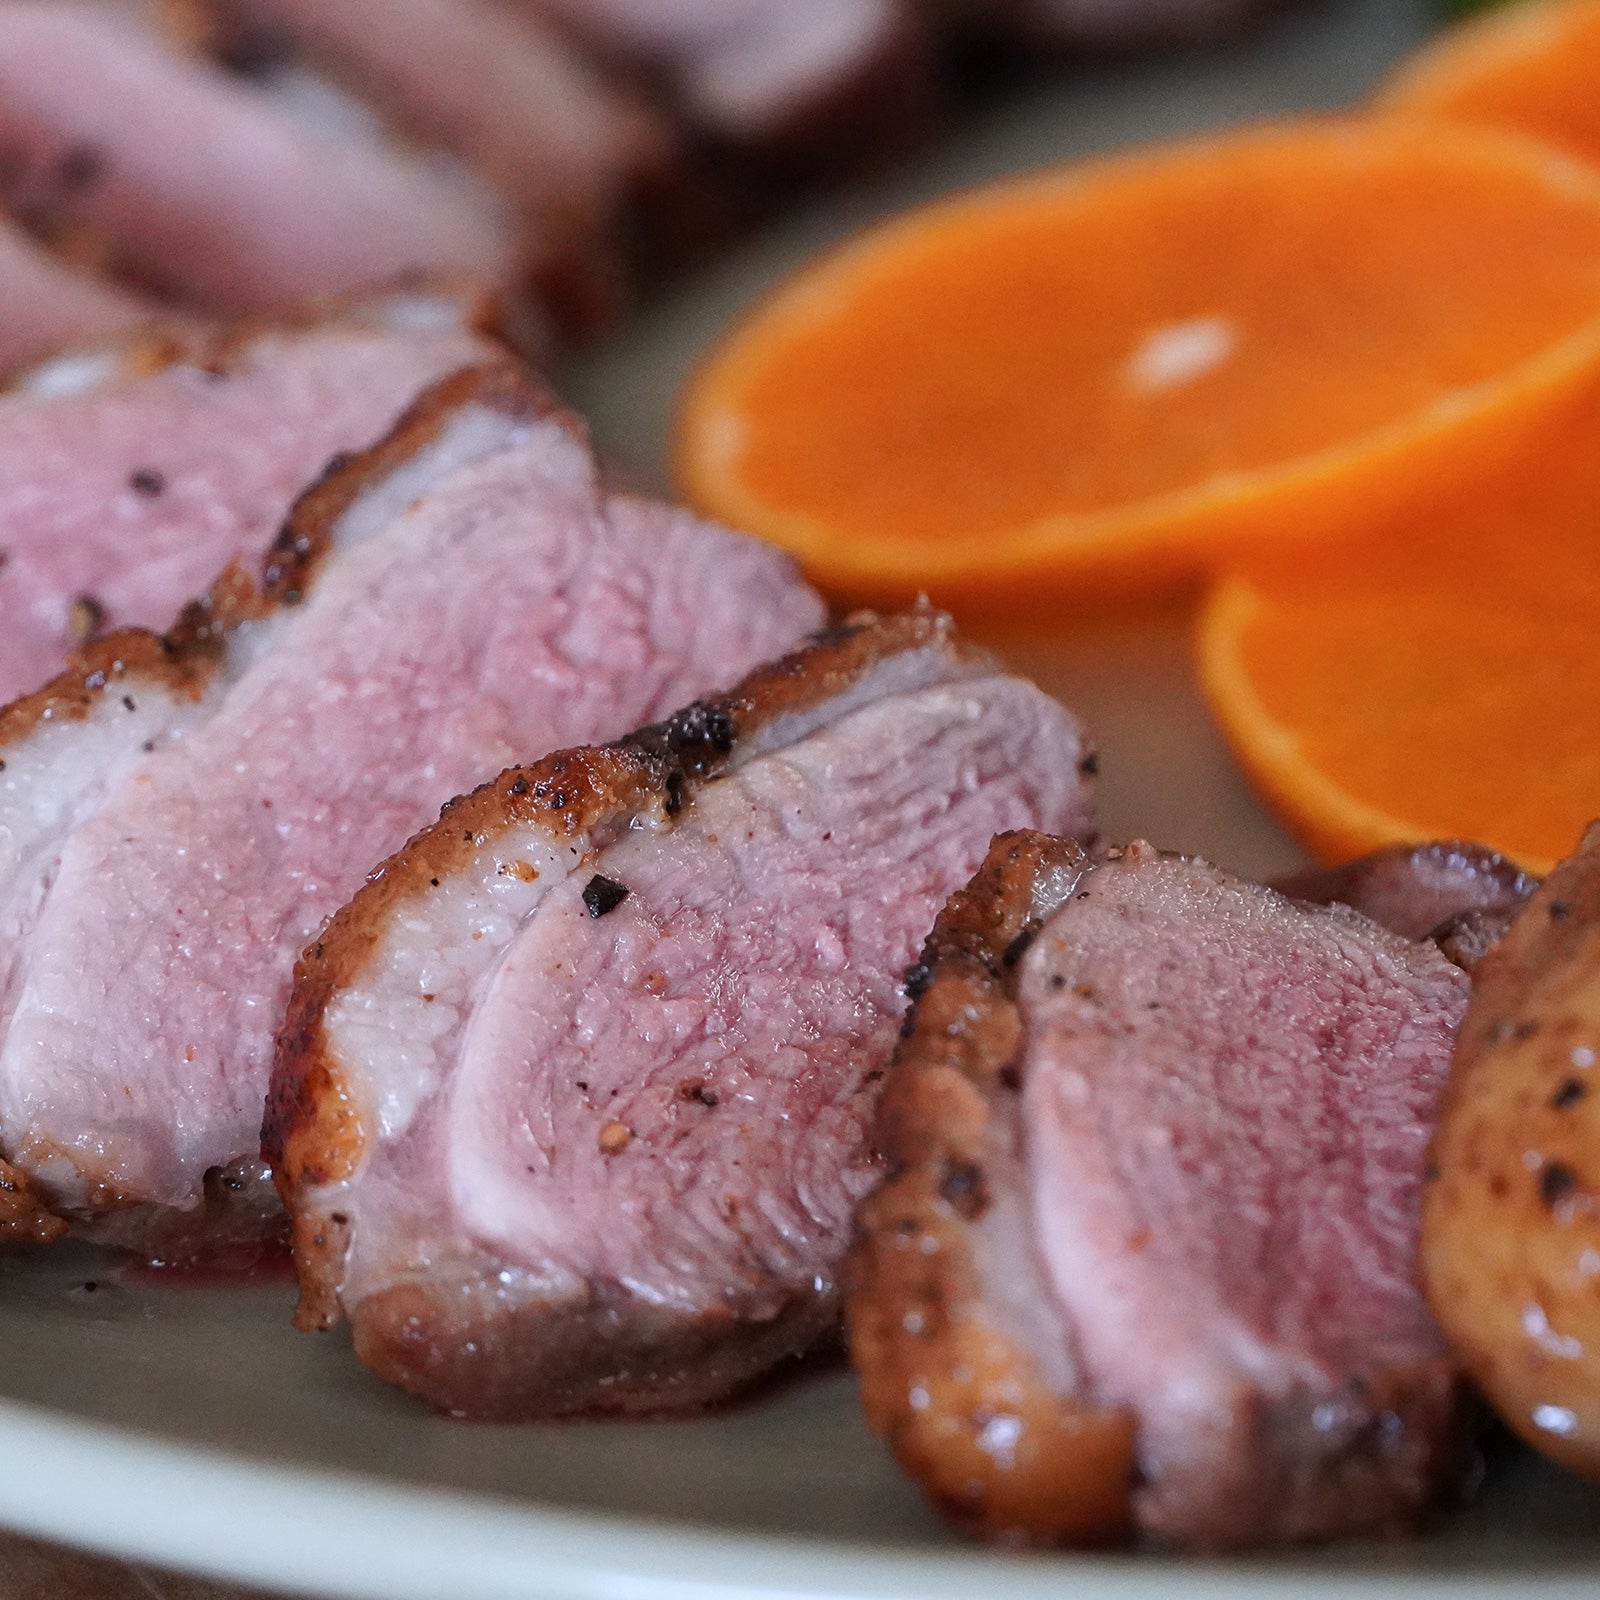 Range-Free Skin-on Duck Breasts from New Zealand (400g) - Horizon Farms